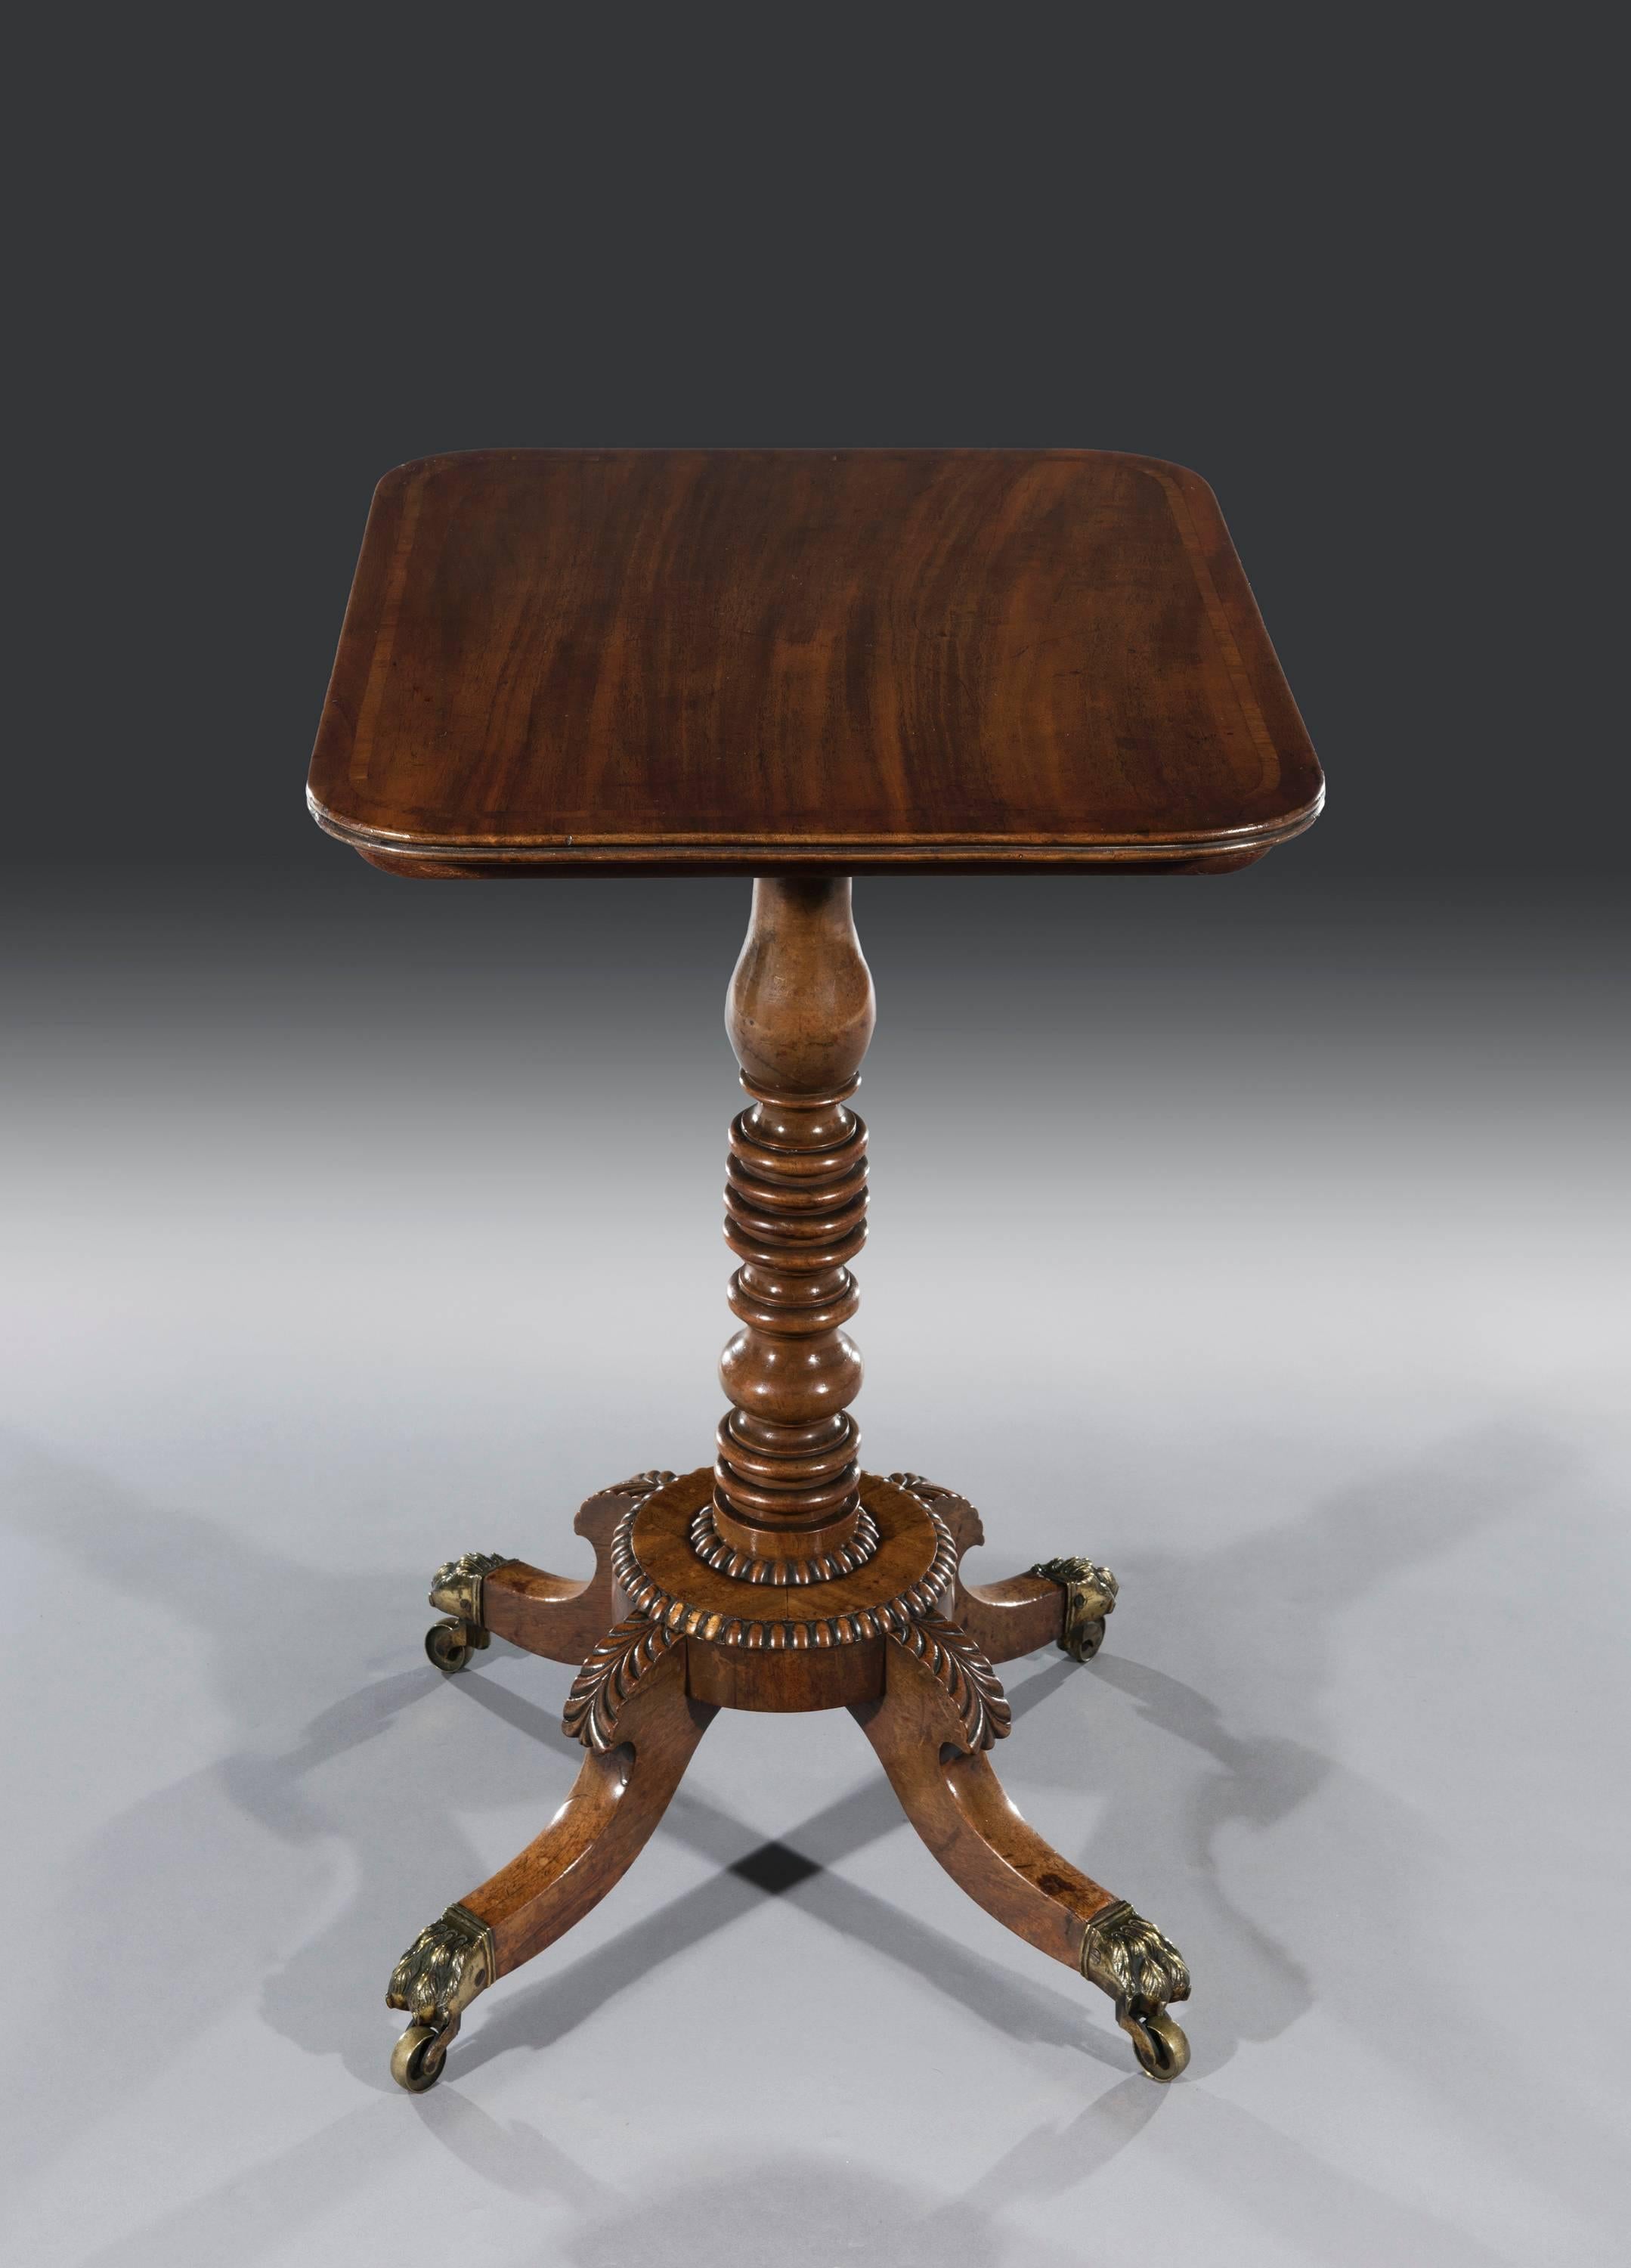 Small Regency Period Mahogany Tilt-Top Single Pedestal Occasional Table.The rectangular top is cross-banded in mahogany with a split moulded edge above a turned solid mahogany pedestal which stands on a circular platform base. This has gadrooned